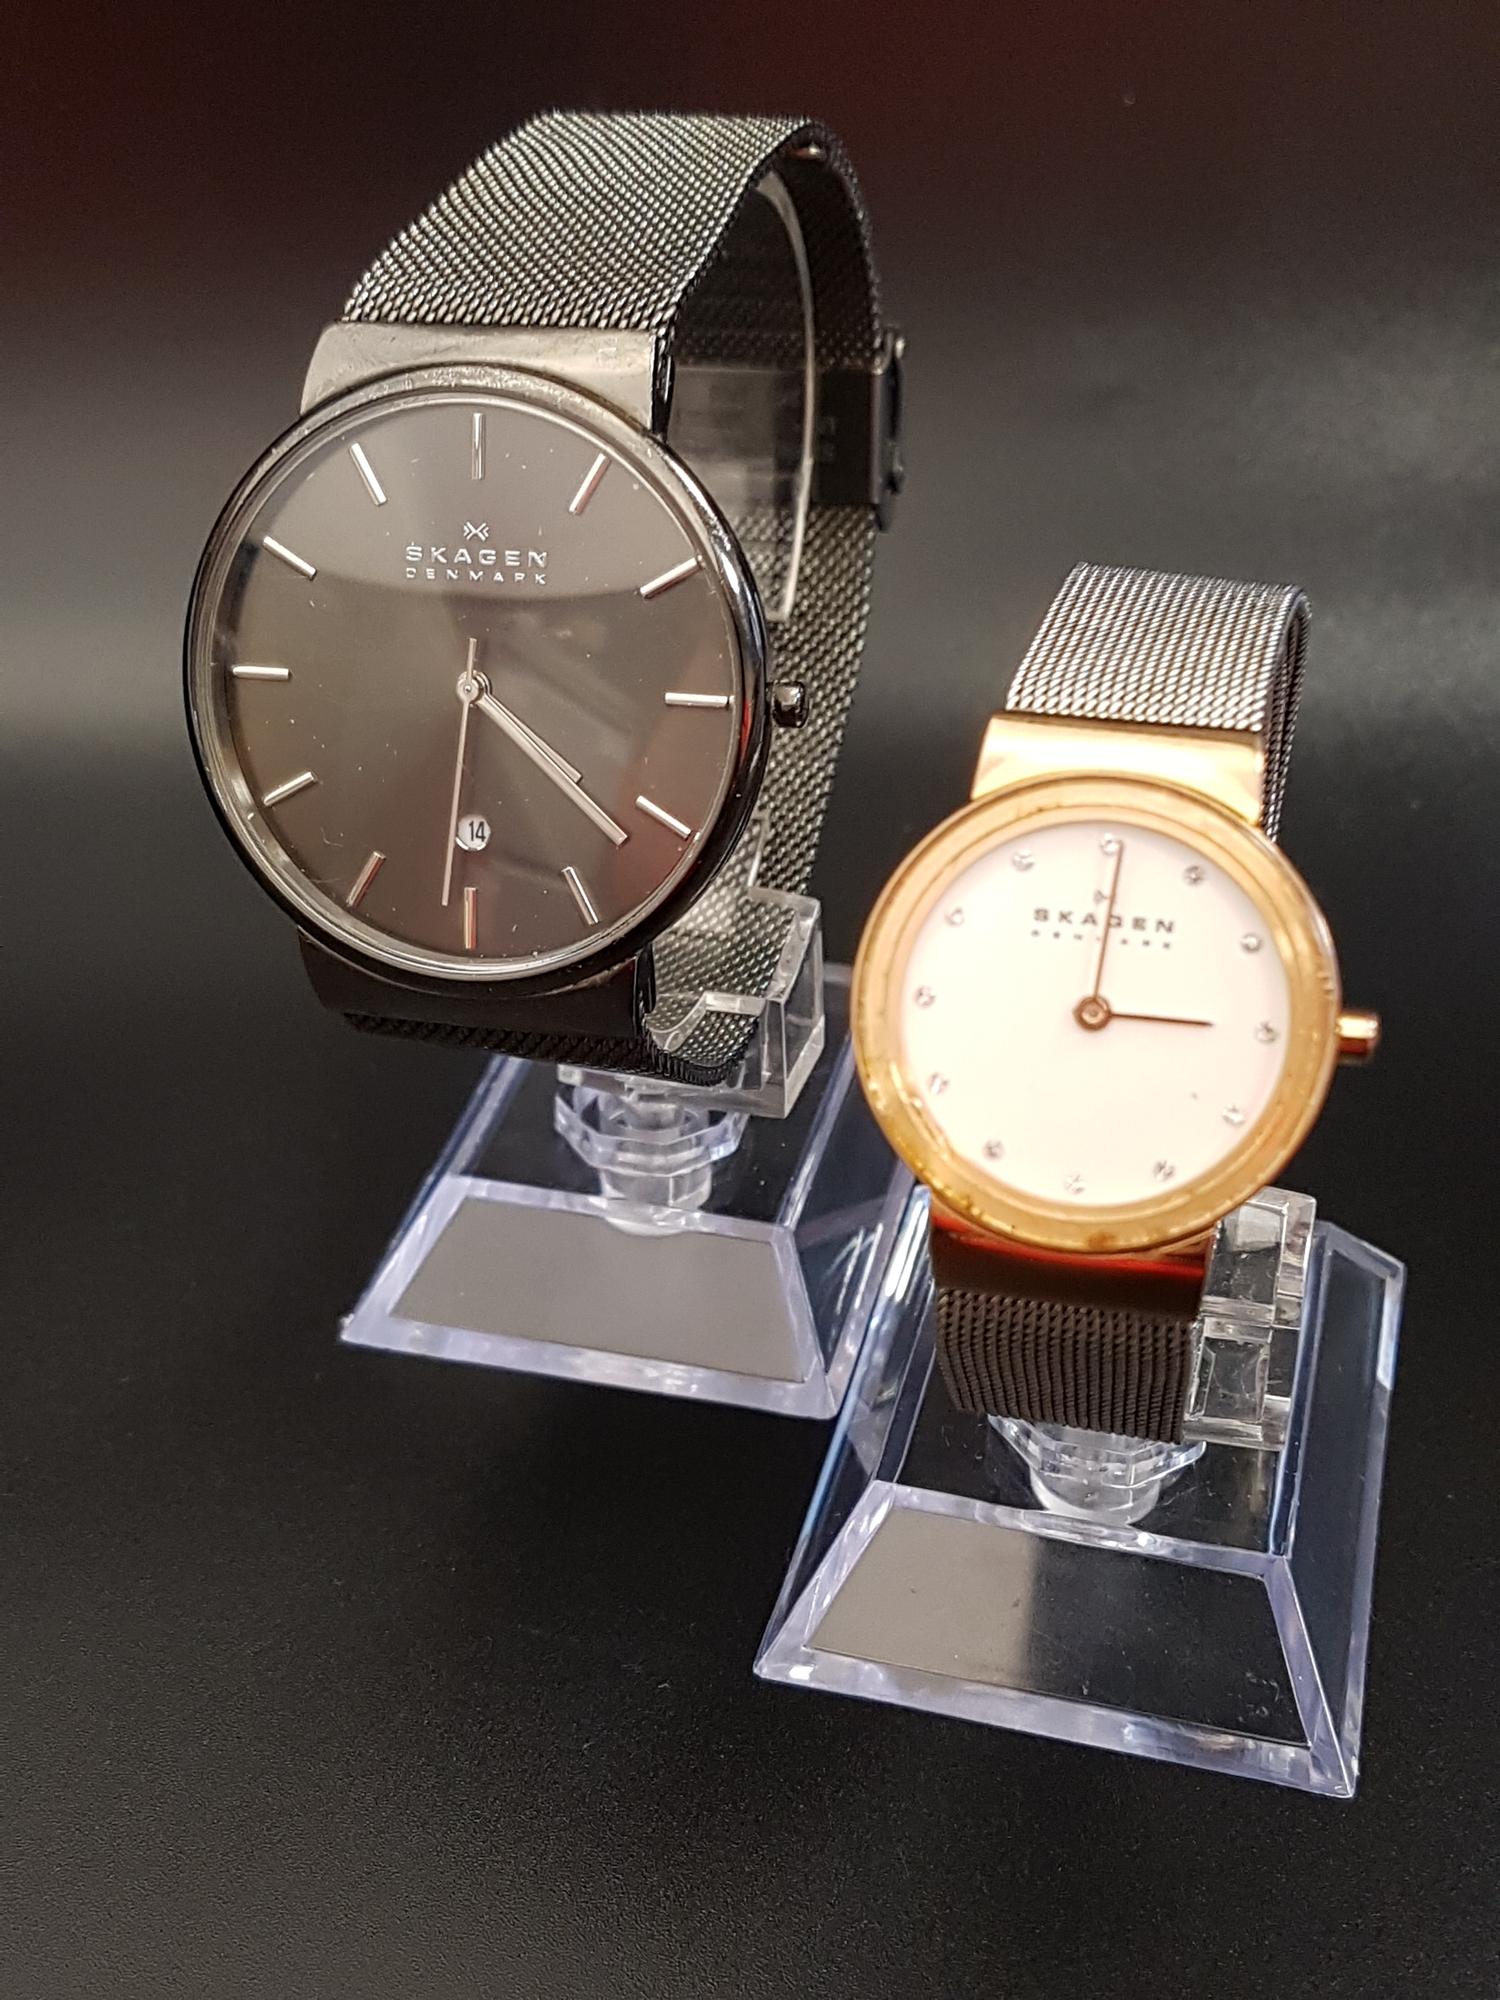 LADIES AND GENTLEMEN'S SKAGEN WRISTWATCHES the ladies Freja watch with white dial and crystal five